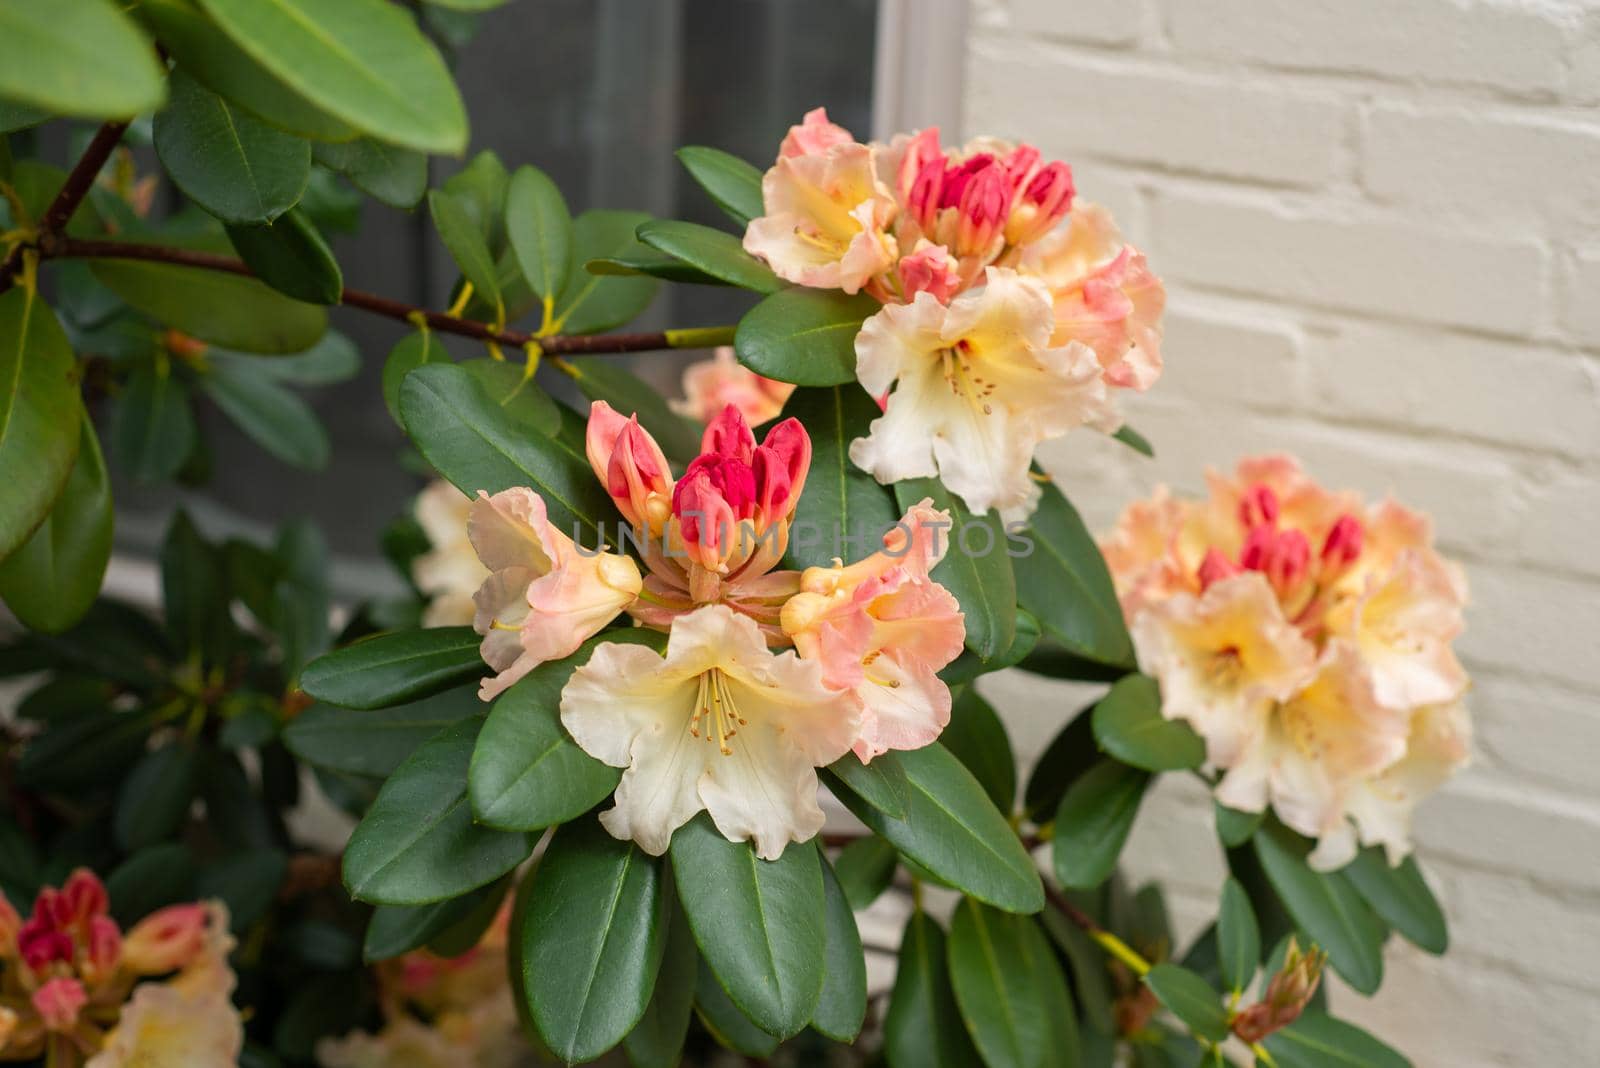 rhododendron blooming with yellow-pink flower buds by ozornina